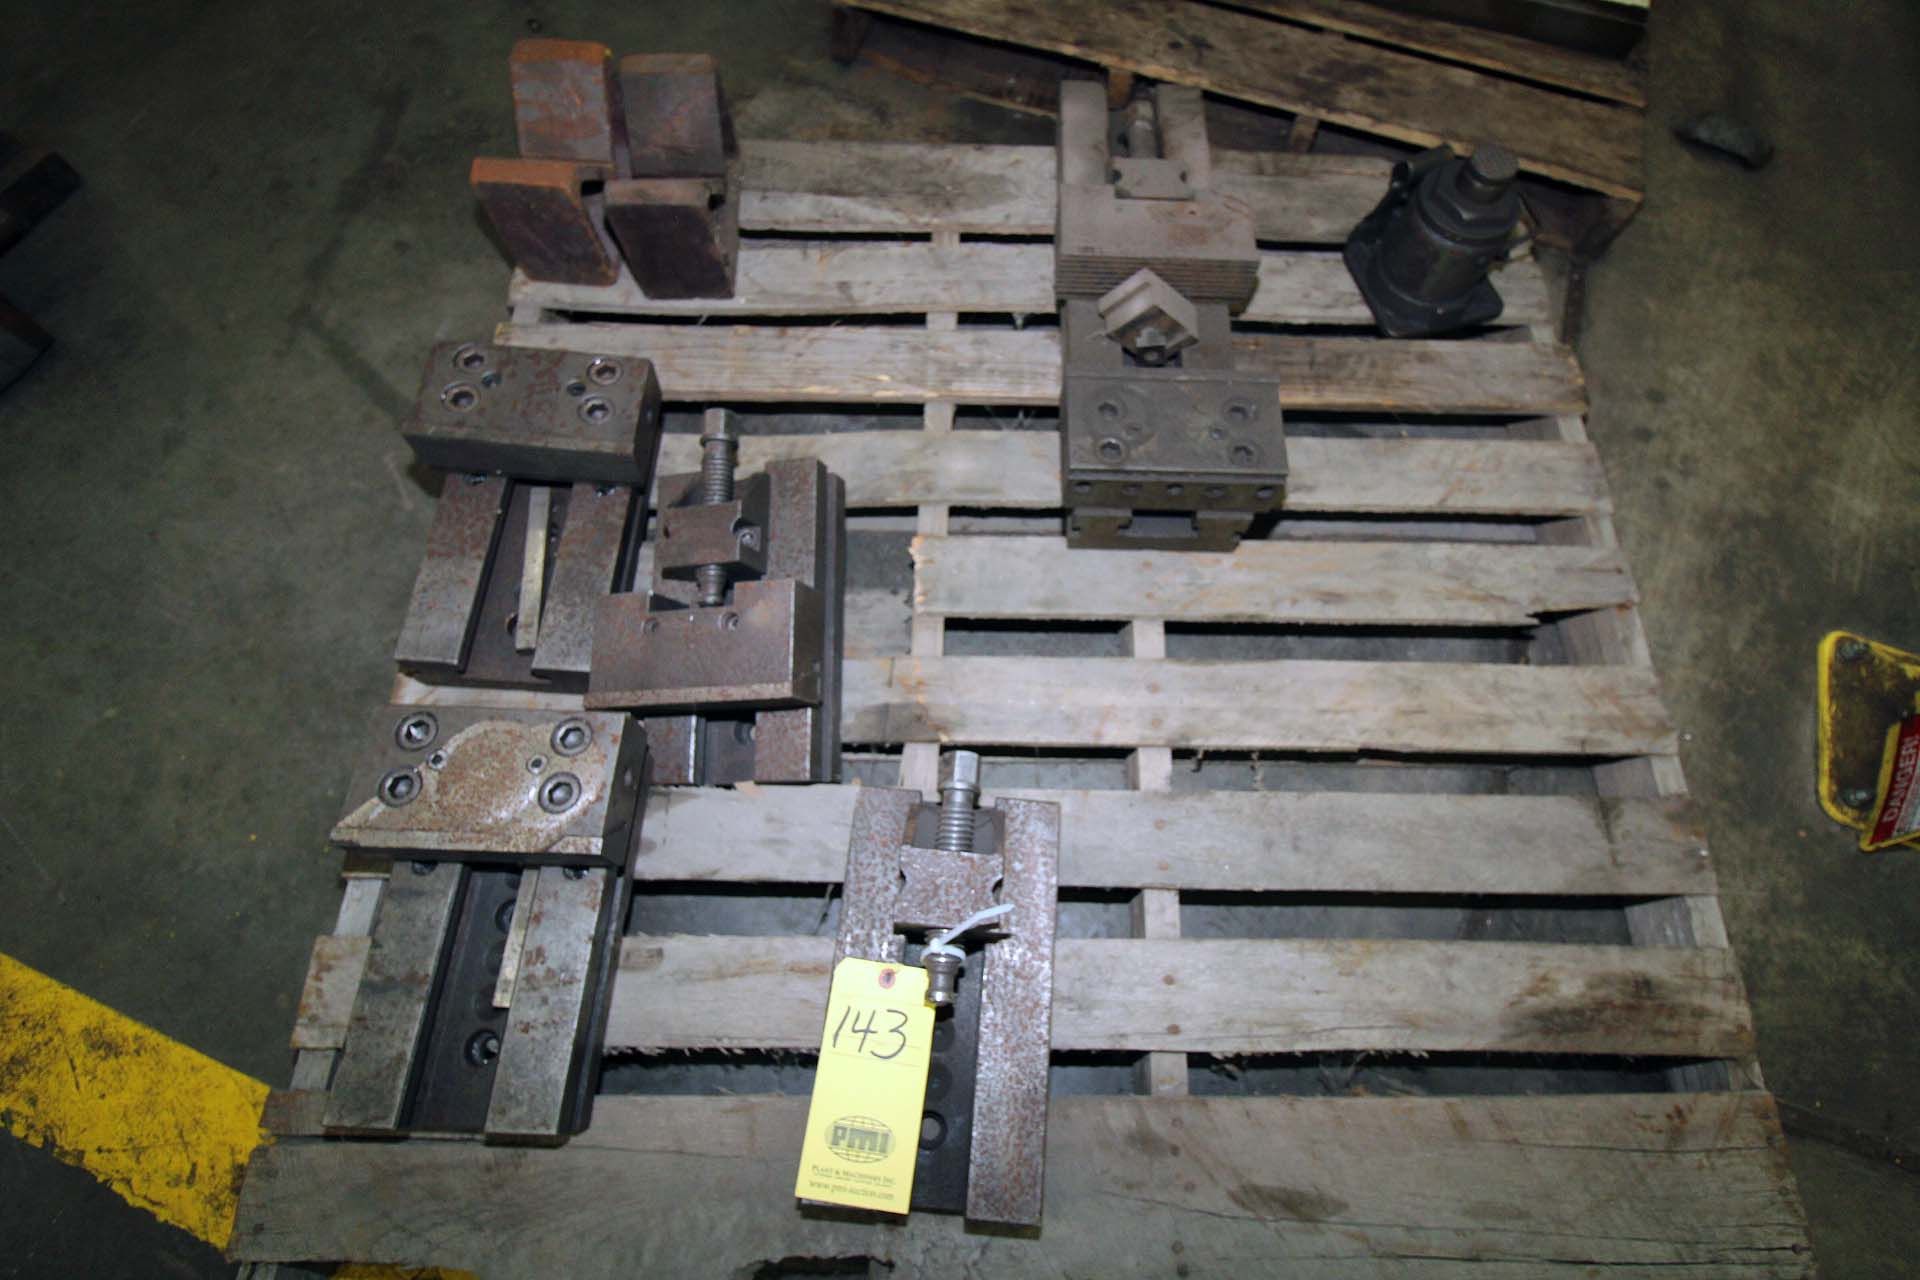 LOT OF VISES (on one pallet)